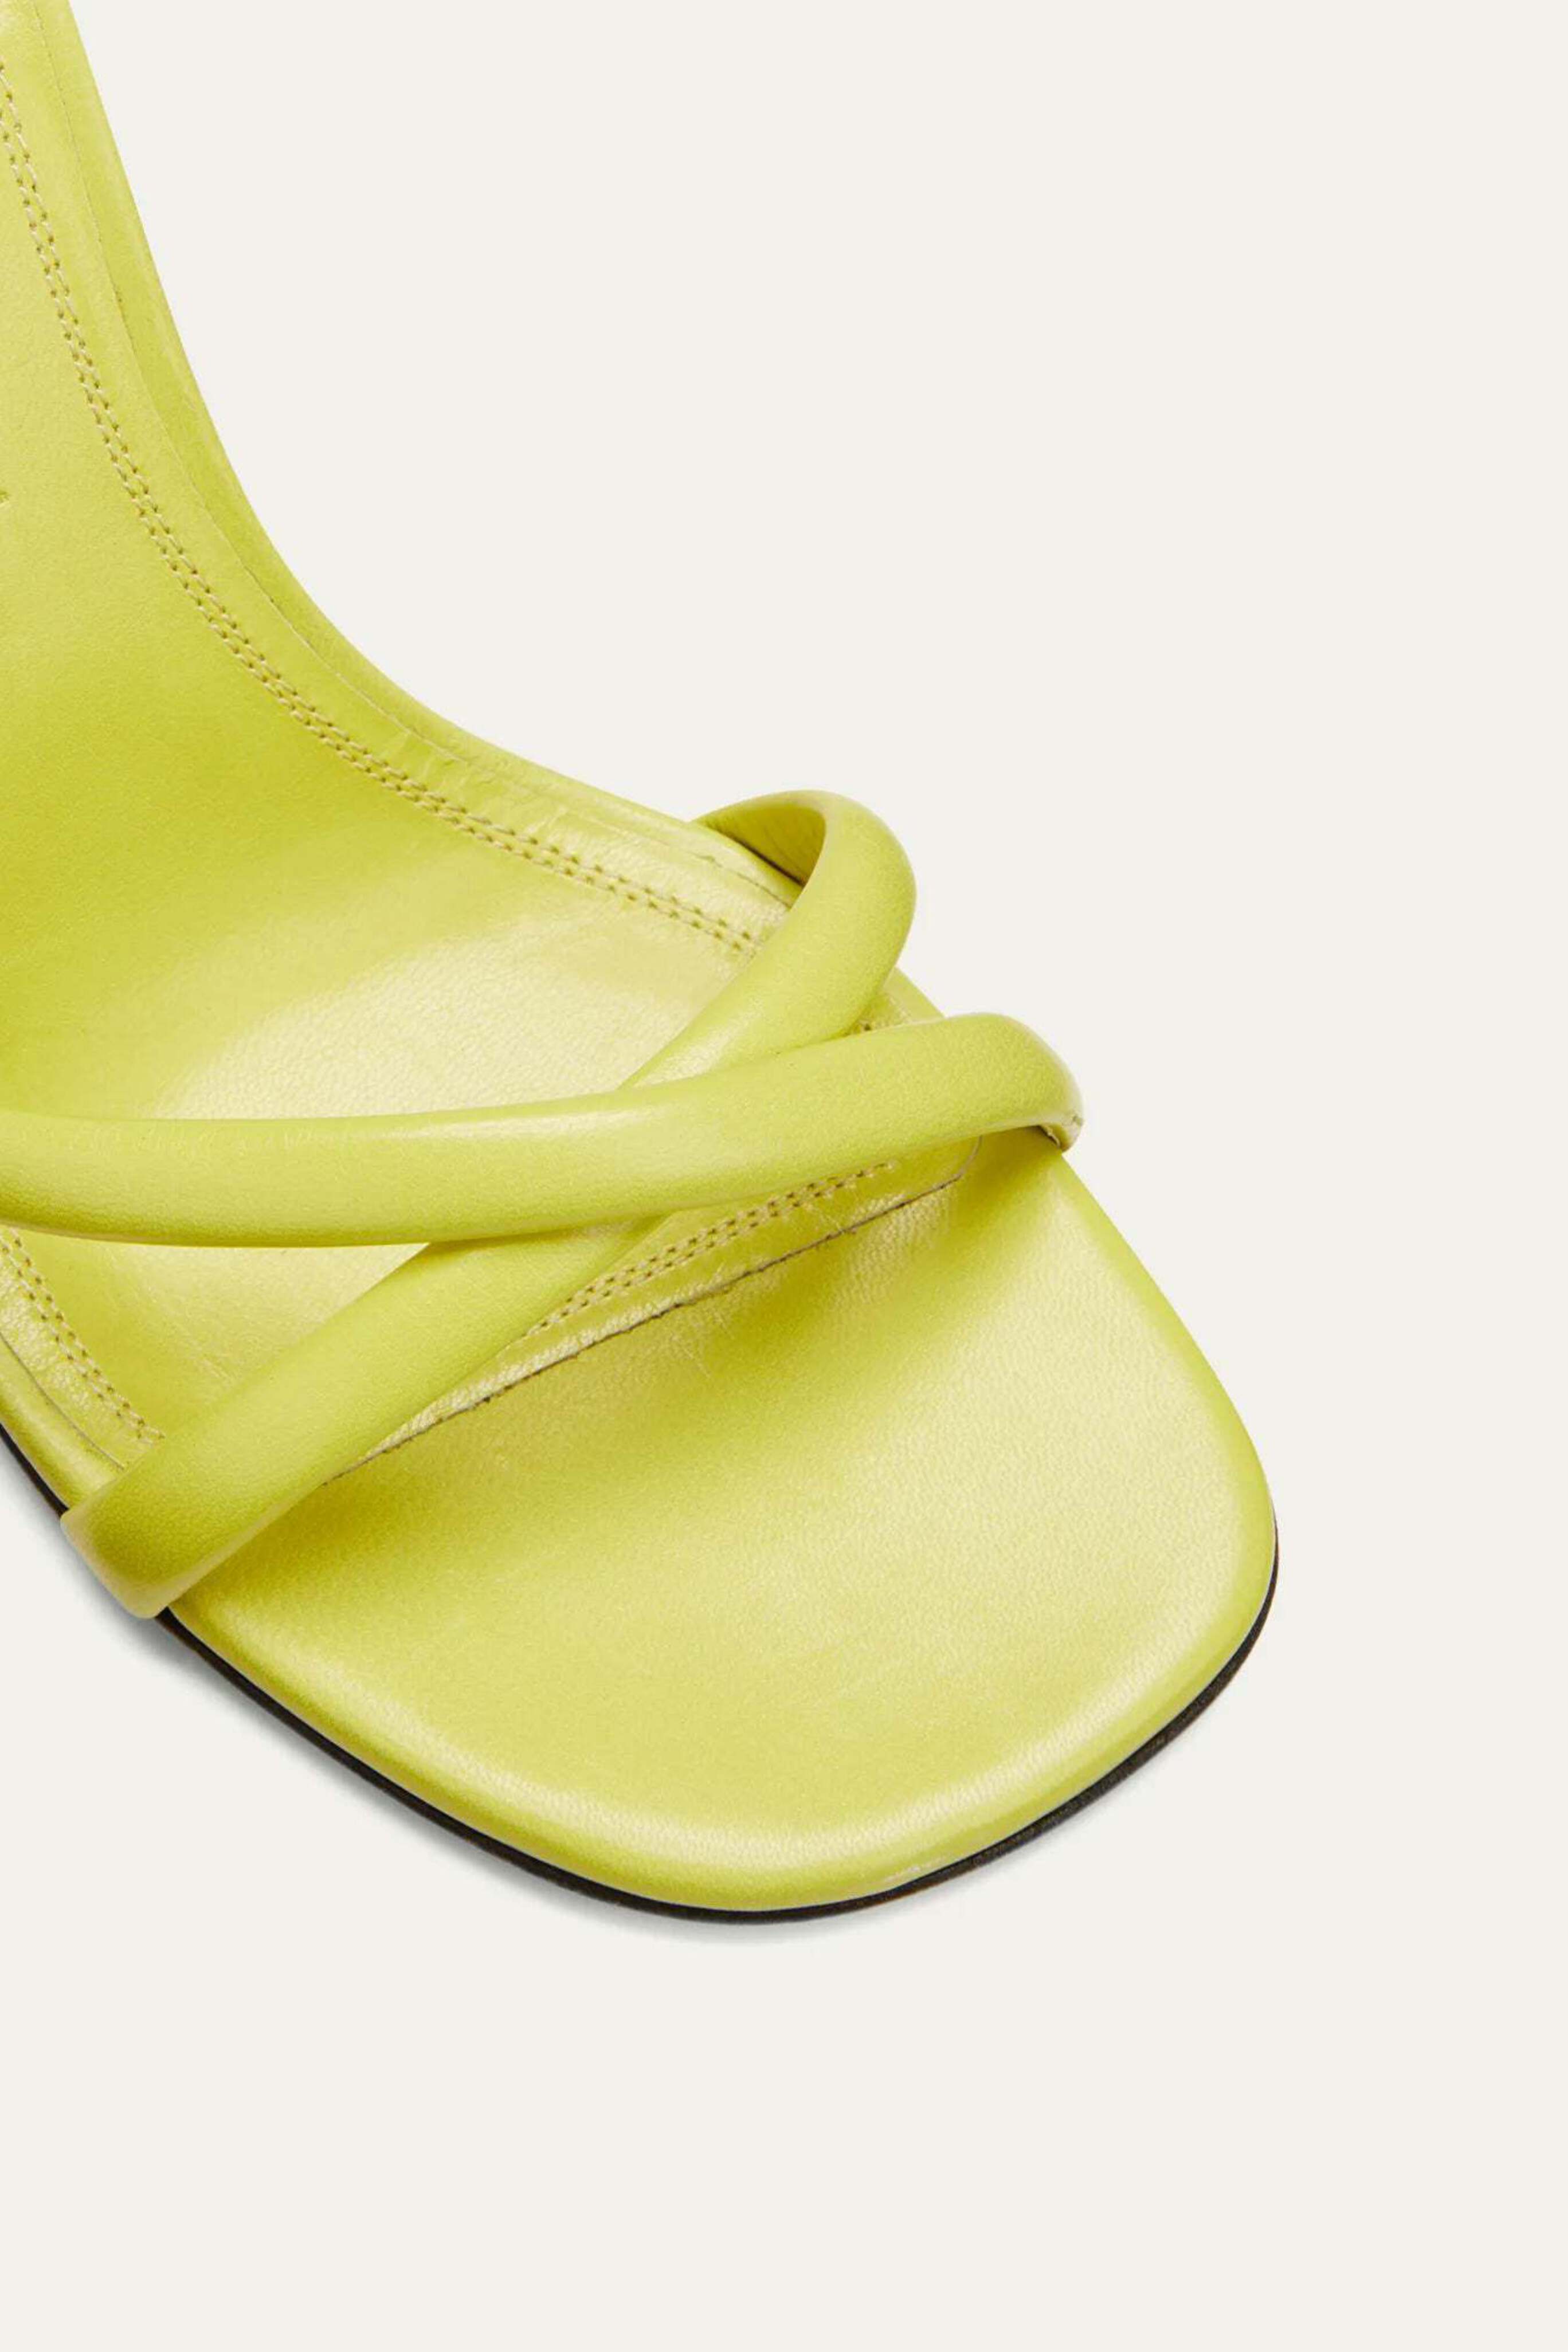 Signature Leather Sandals in Apple Green